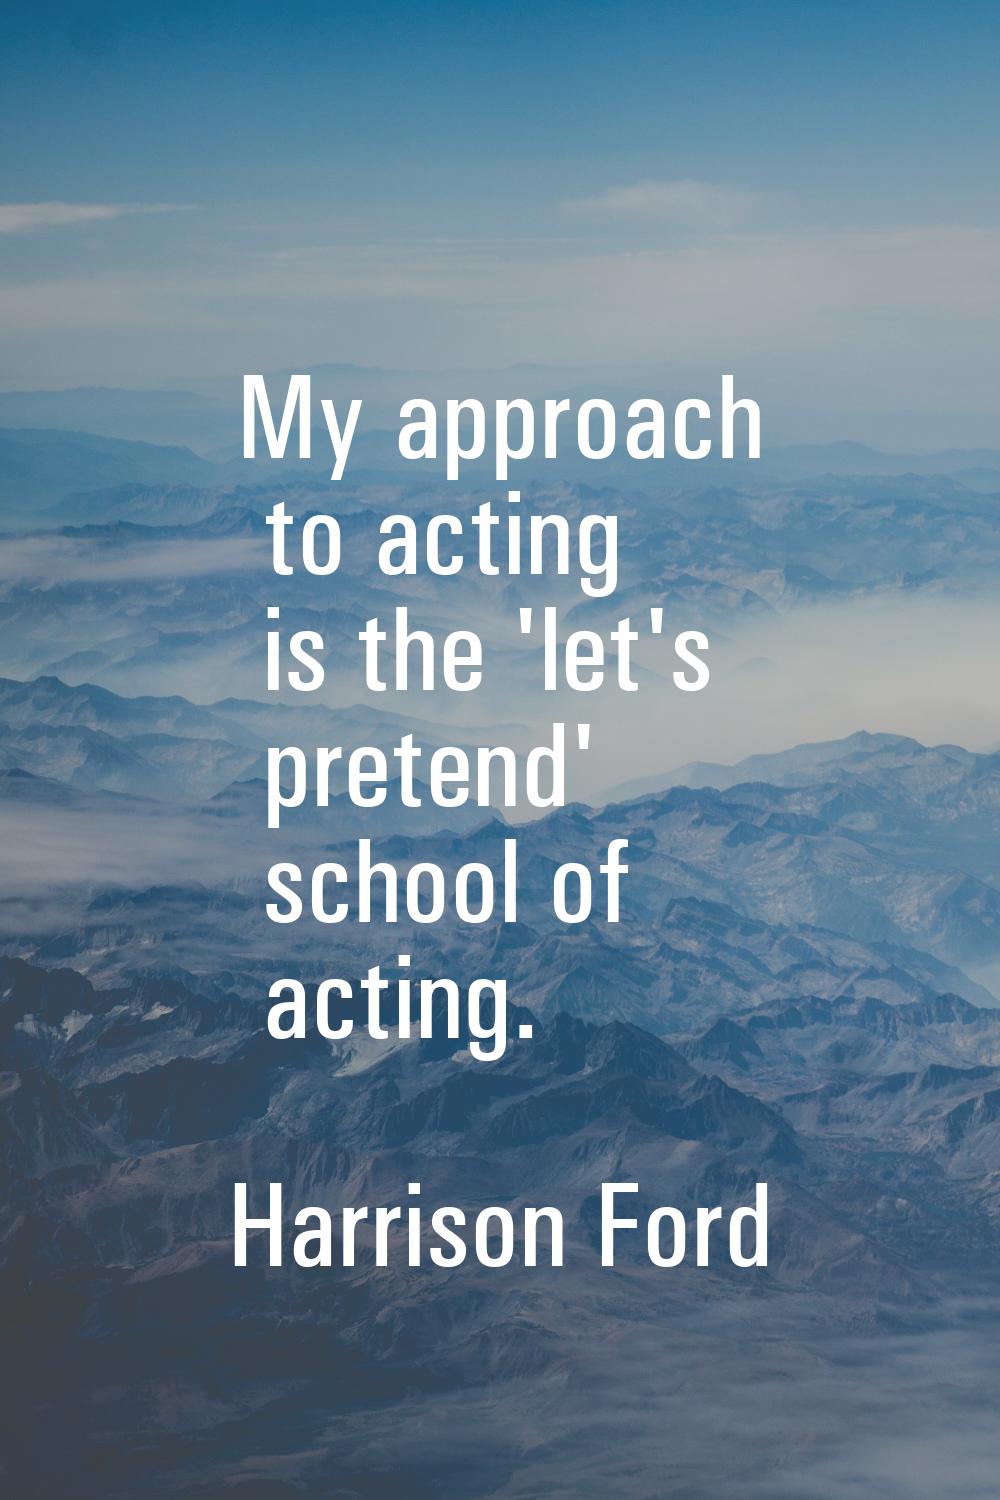 My approach to acting is the 'let's pretend' school of acting.